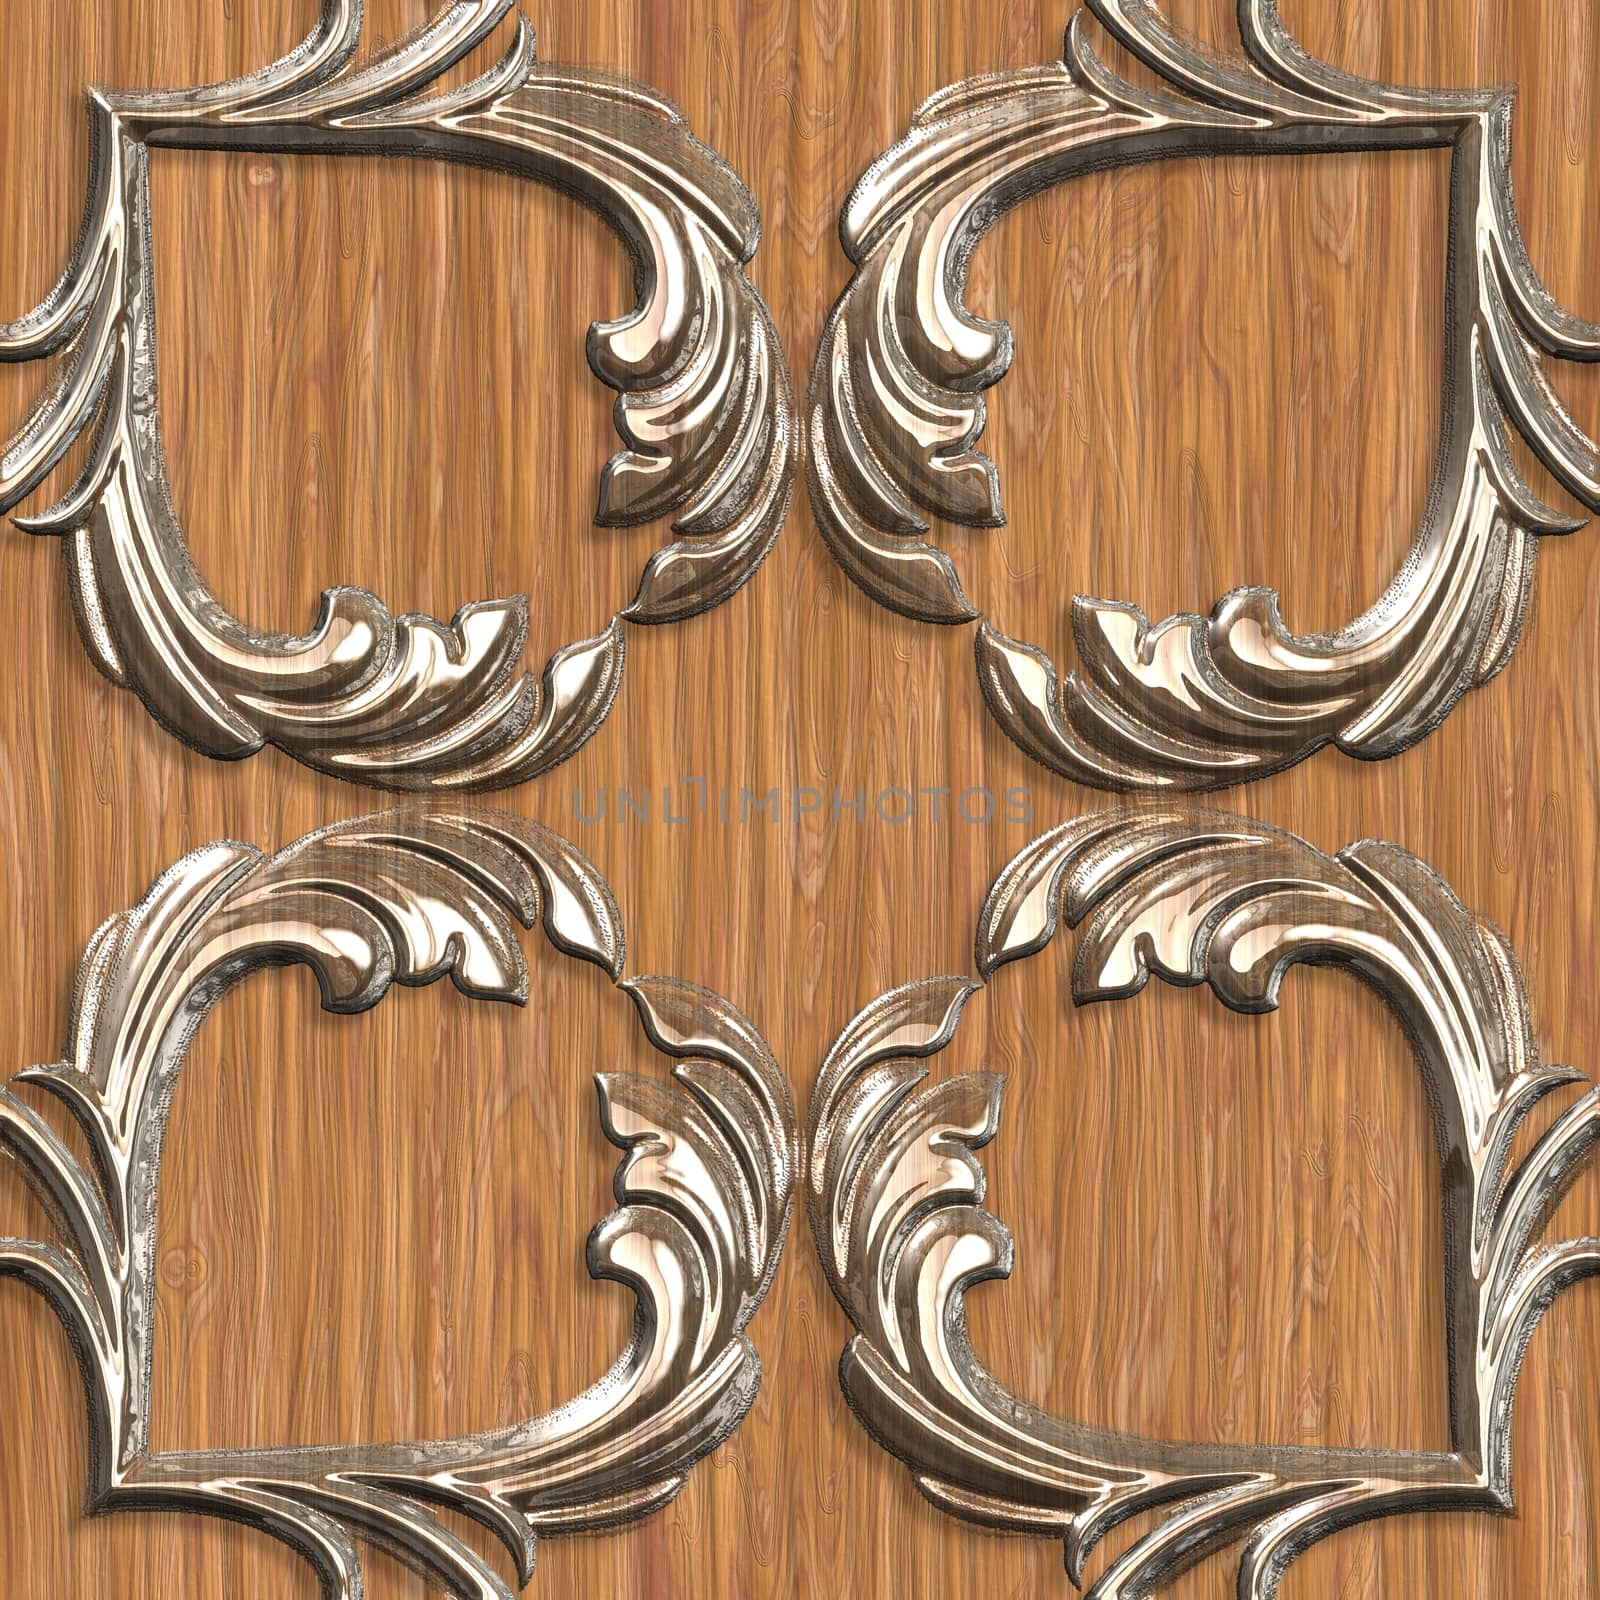 Wood surfaces sparkling glass tile seamless pattern.